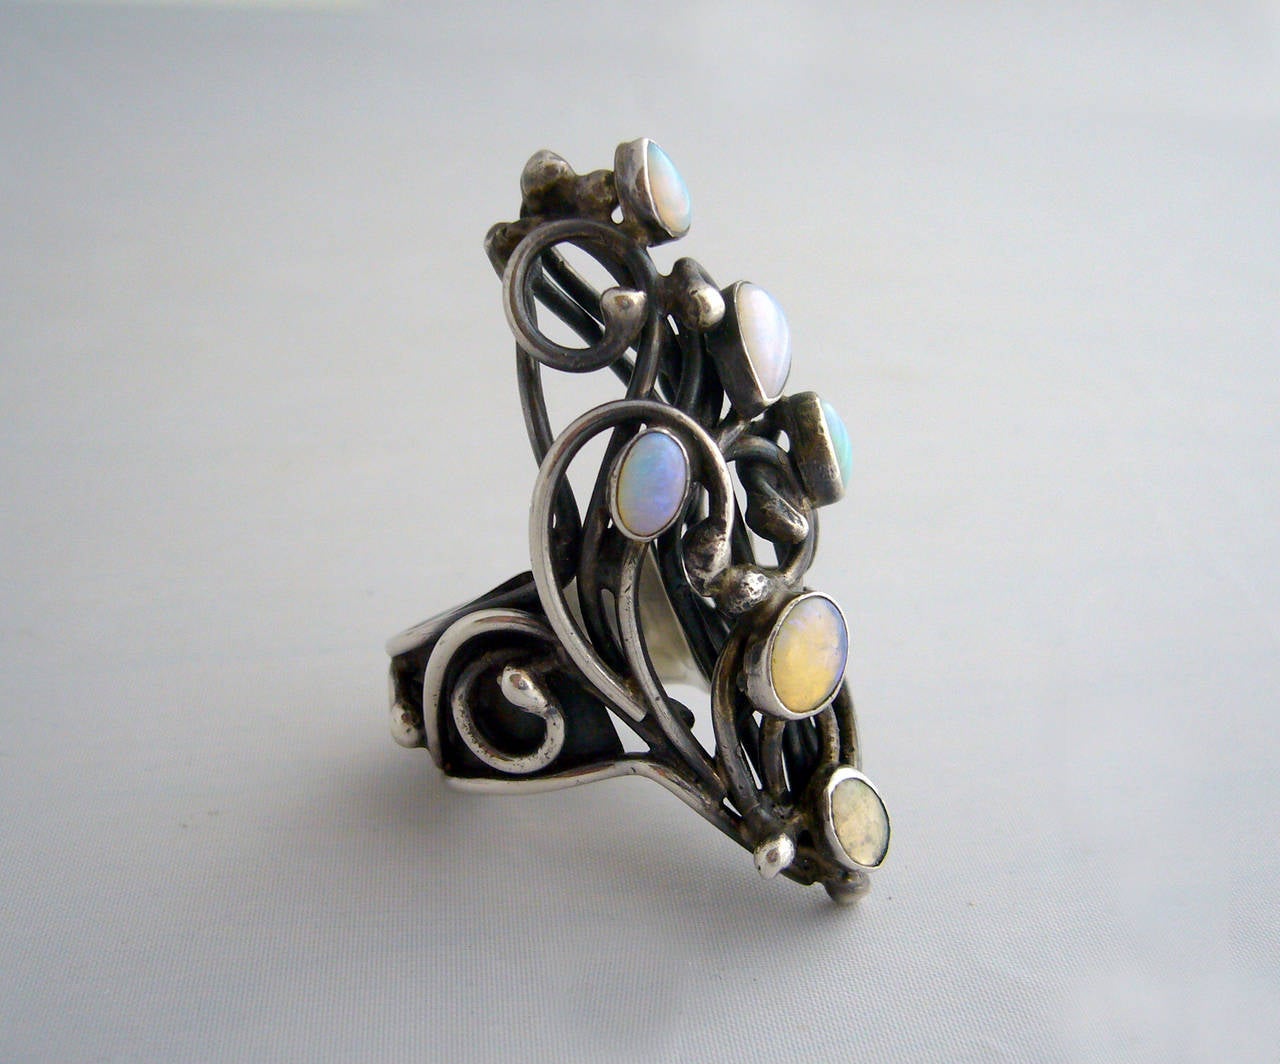 An outstanding opal and sterling silver ring designed by Rachel Gera of Israel.  Face of the ring measures 2.25